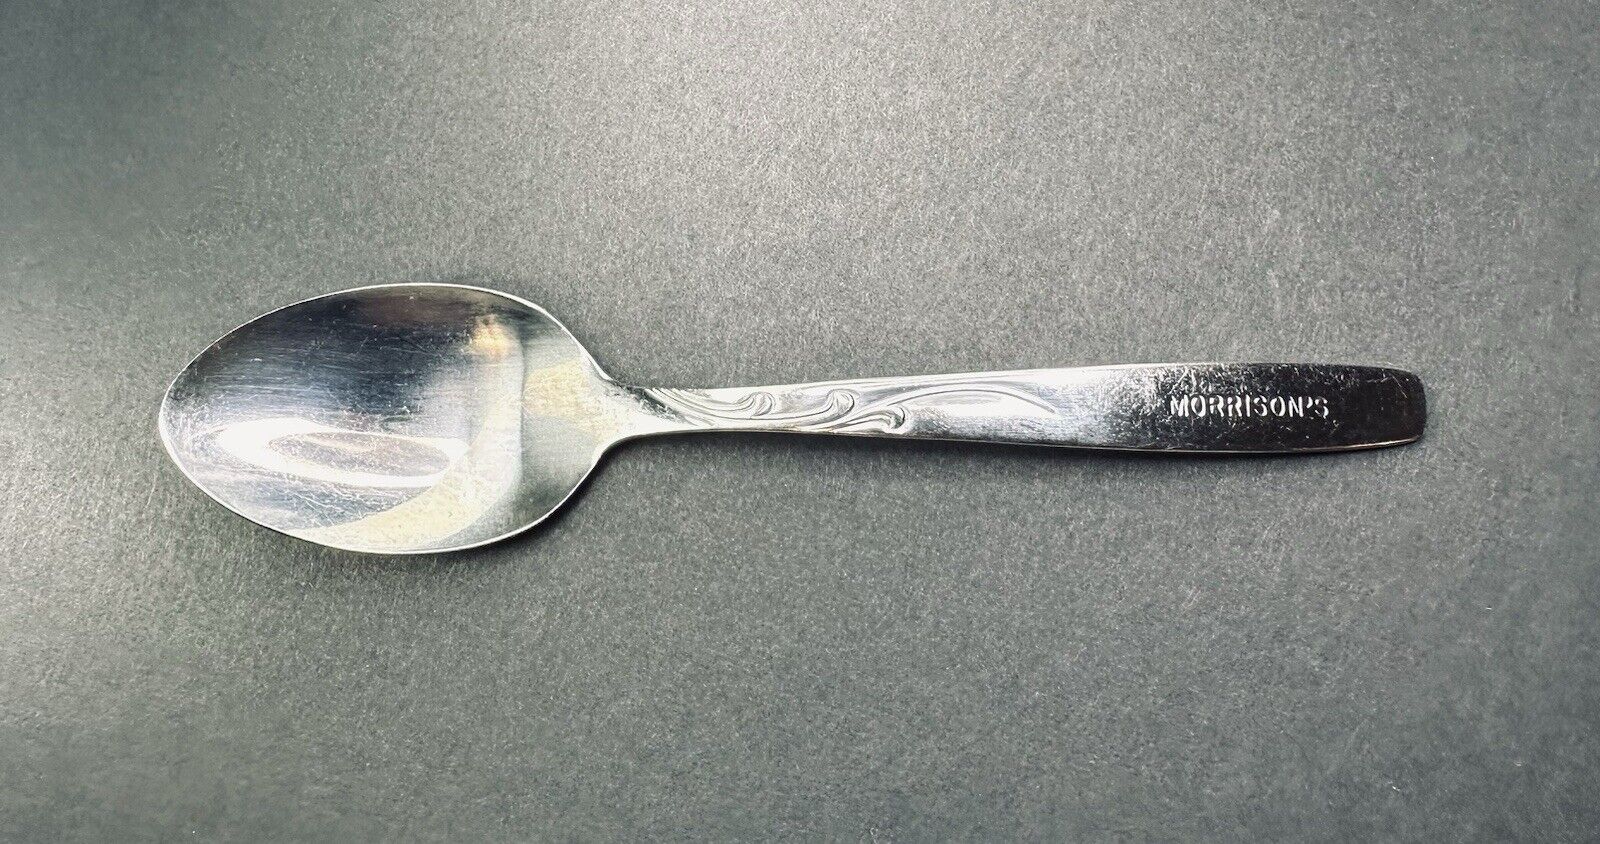 Vintage Morrison’s Teaspoon ISCO Stainless Steel, made in Korea, Collectible